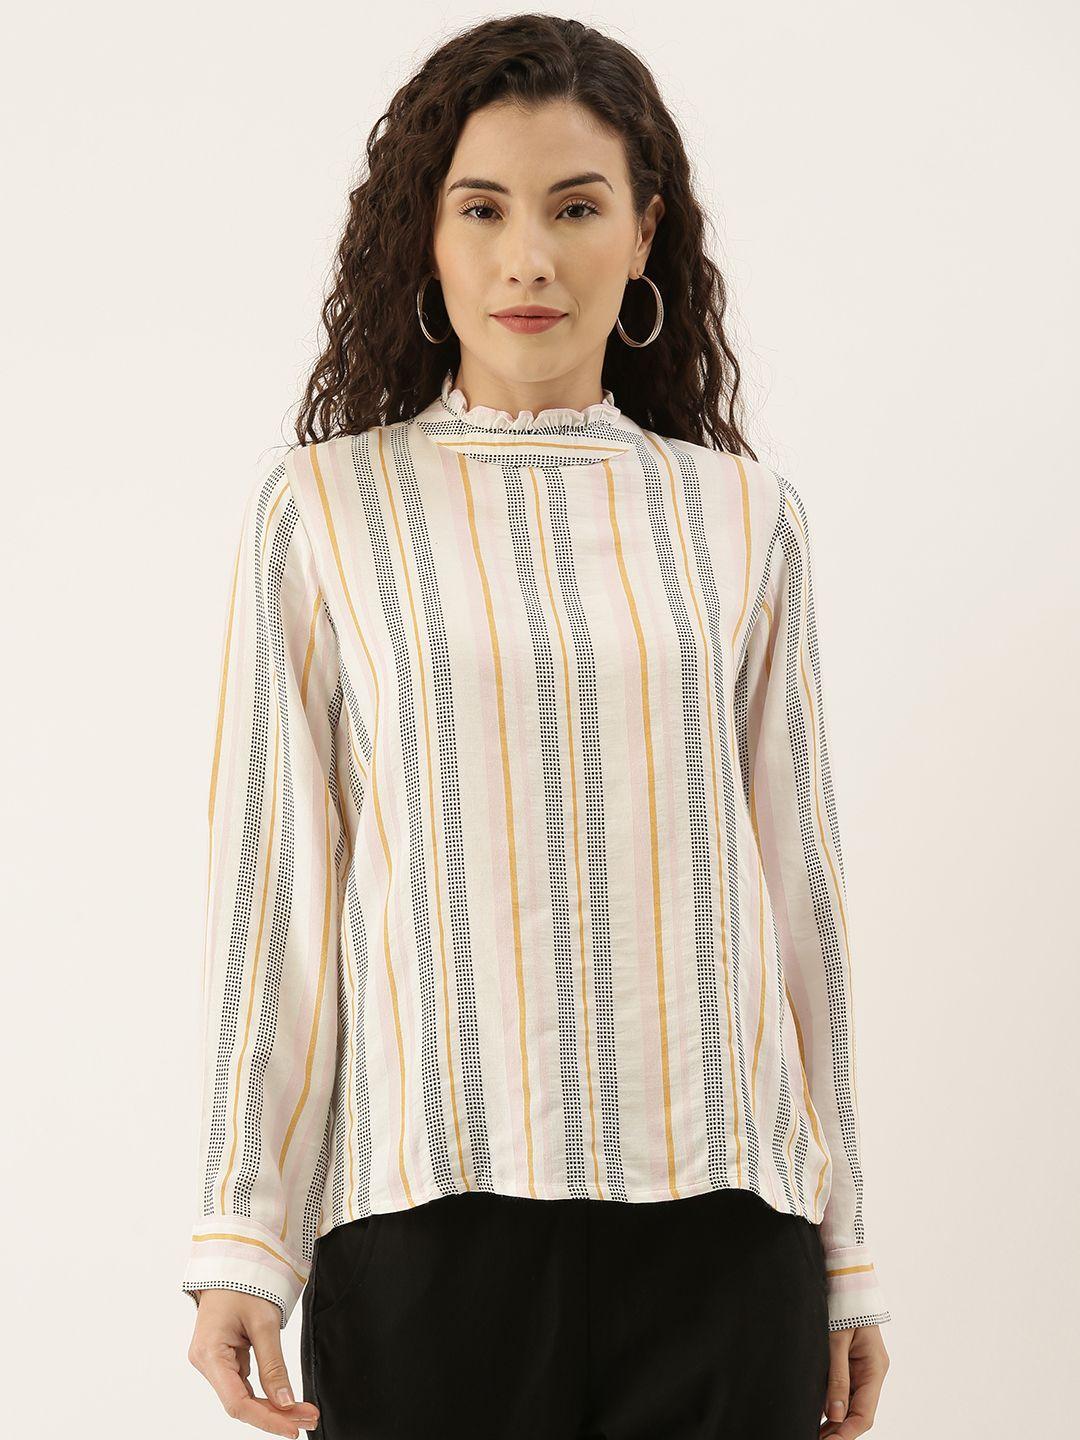 and women white striped shirt style top